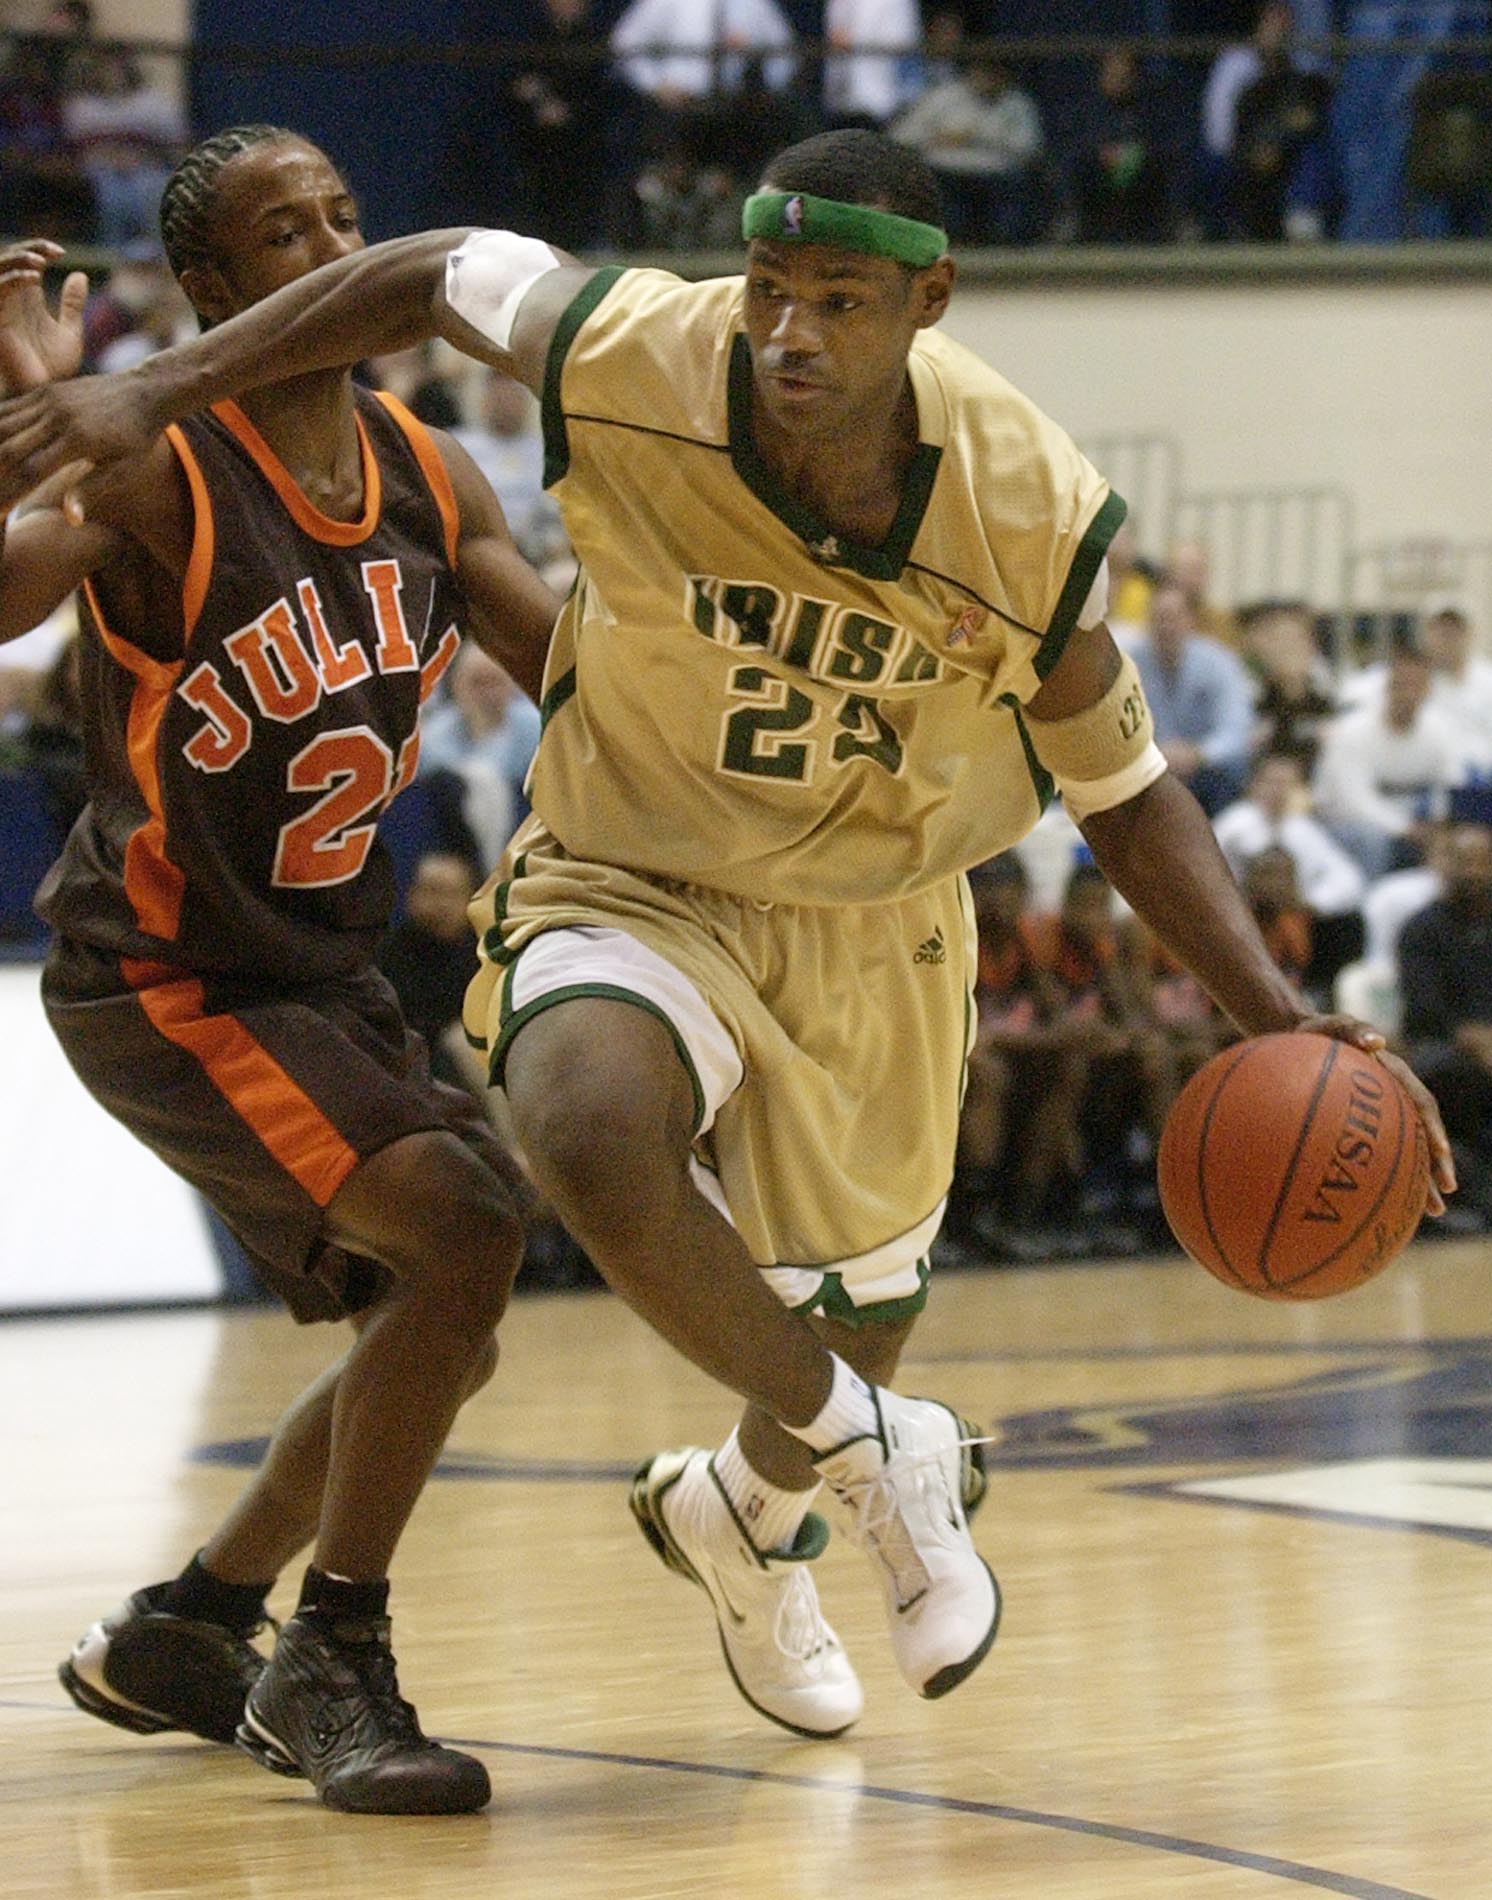 St. Vincent-St. Mary forward LeBron James (23) drives past Chicago Julian defender Jim Brown during the second half at the University of Akron, Saturday, Dec. 7, 2002. (PHIL LONG/SPECIAL TO THE PLAIN DEALER)